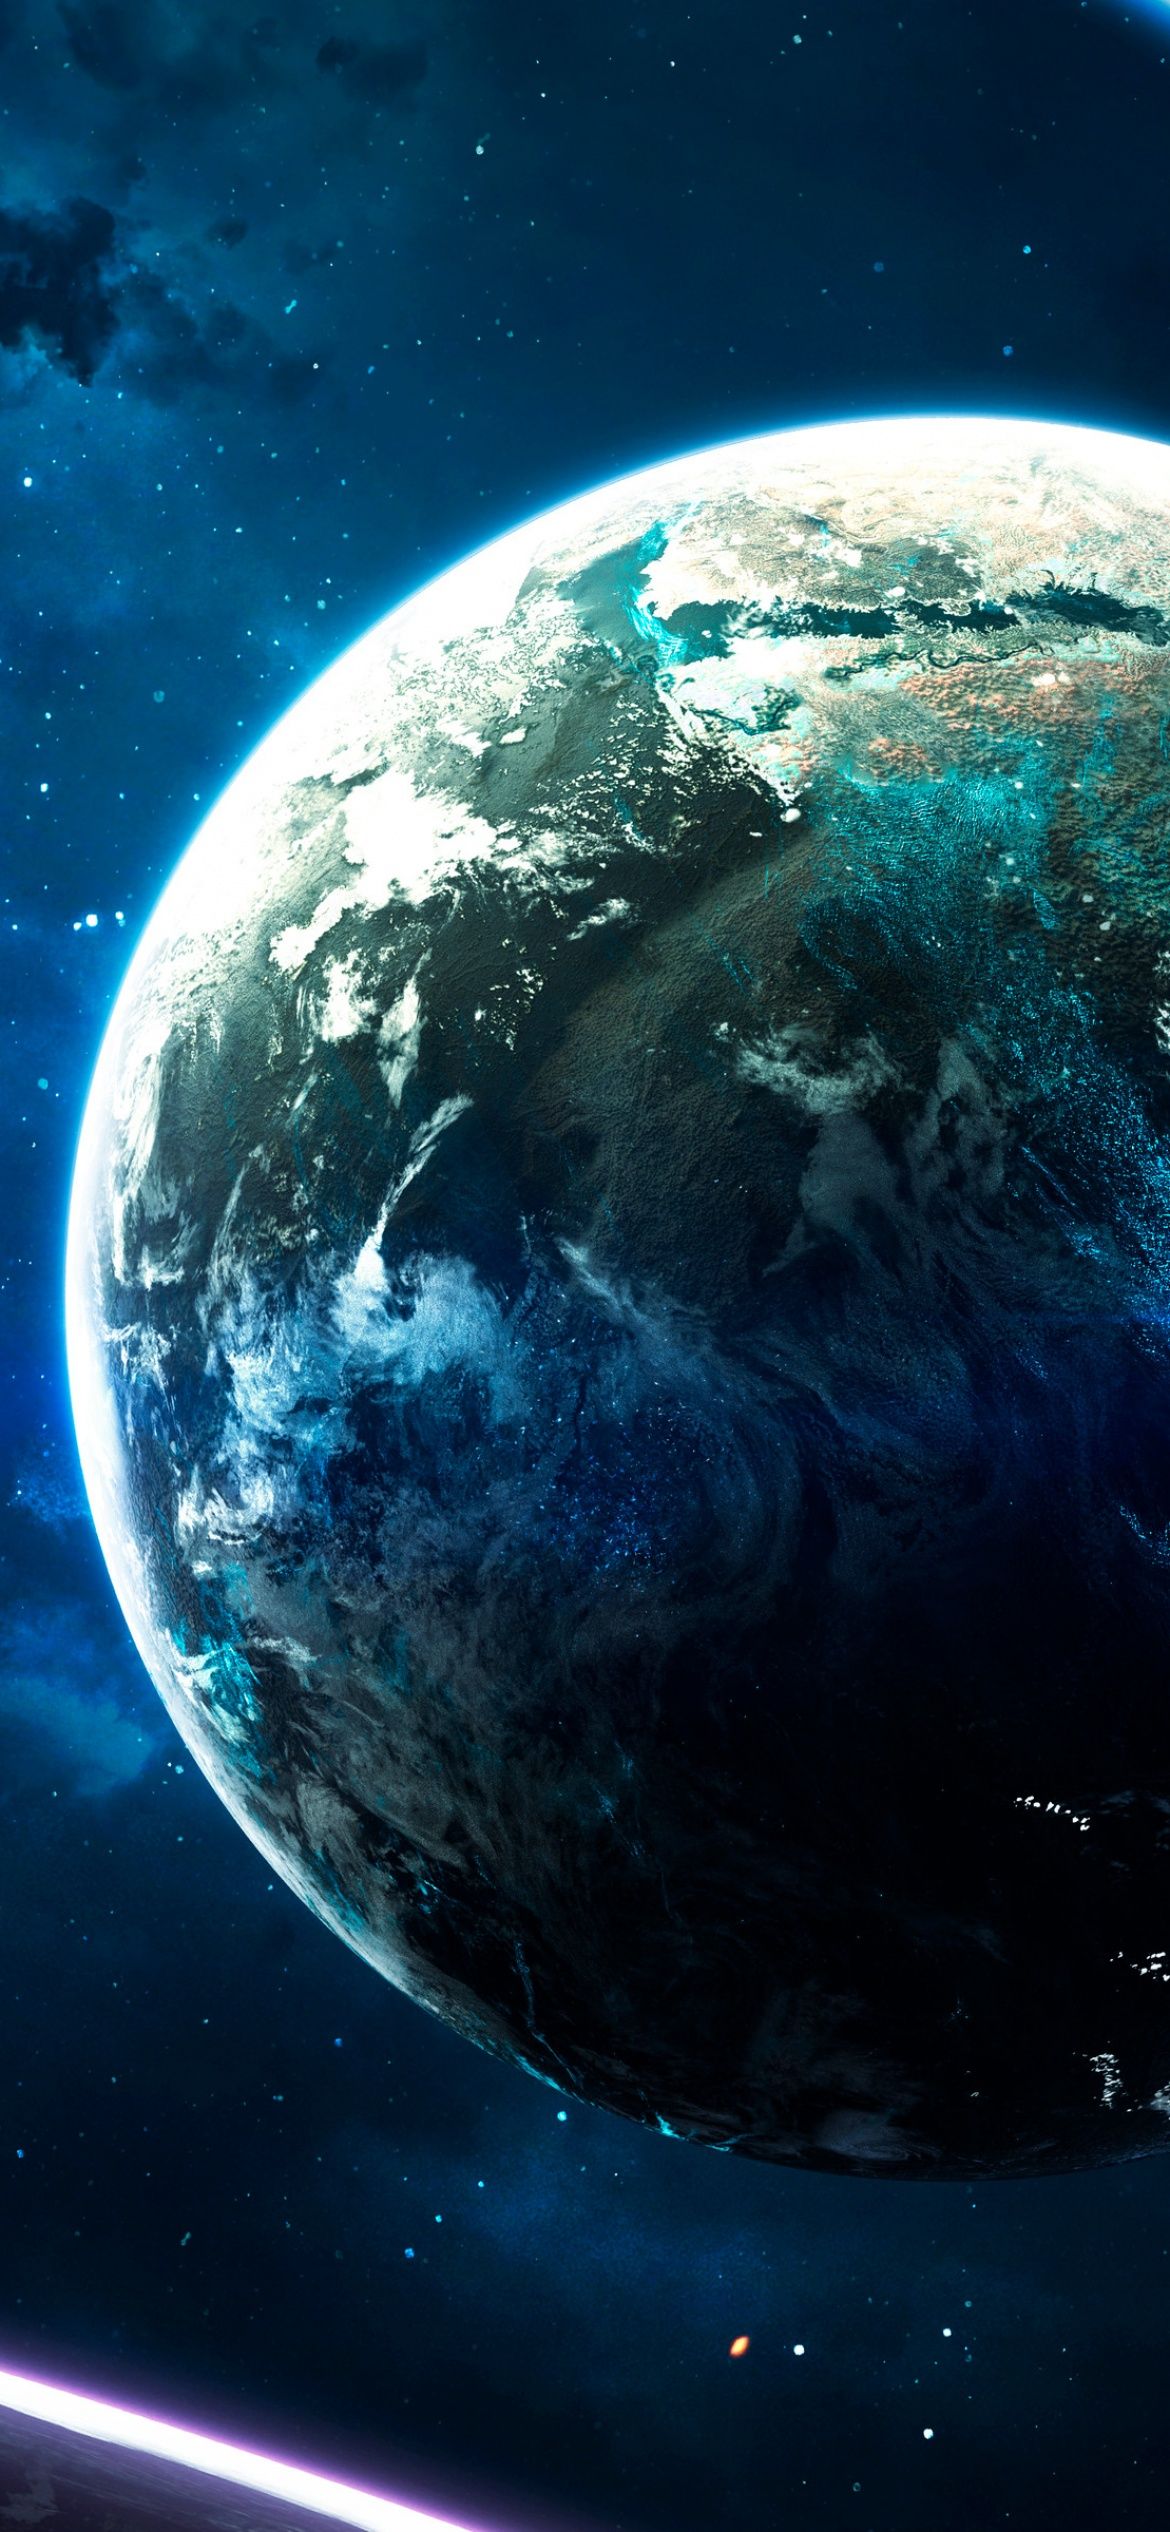 IPhone wallpaper with a picture of the Earth - Earth